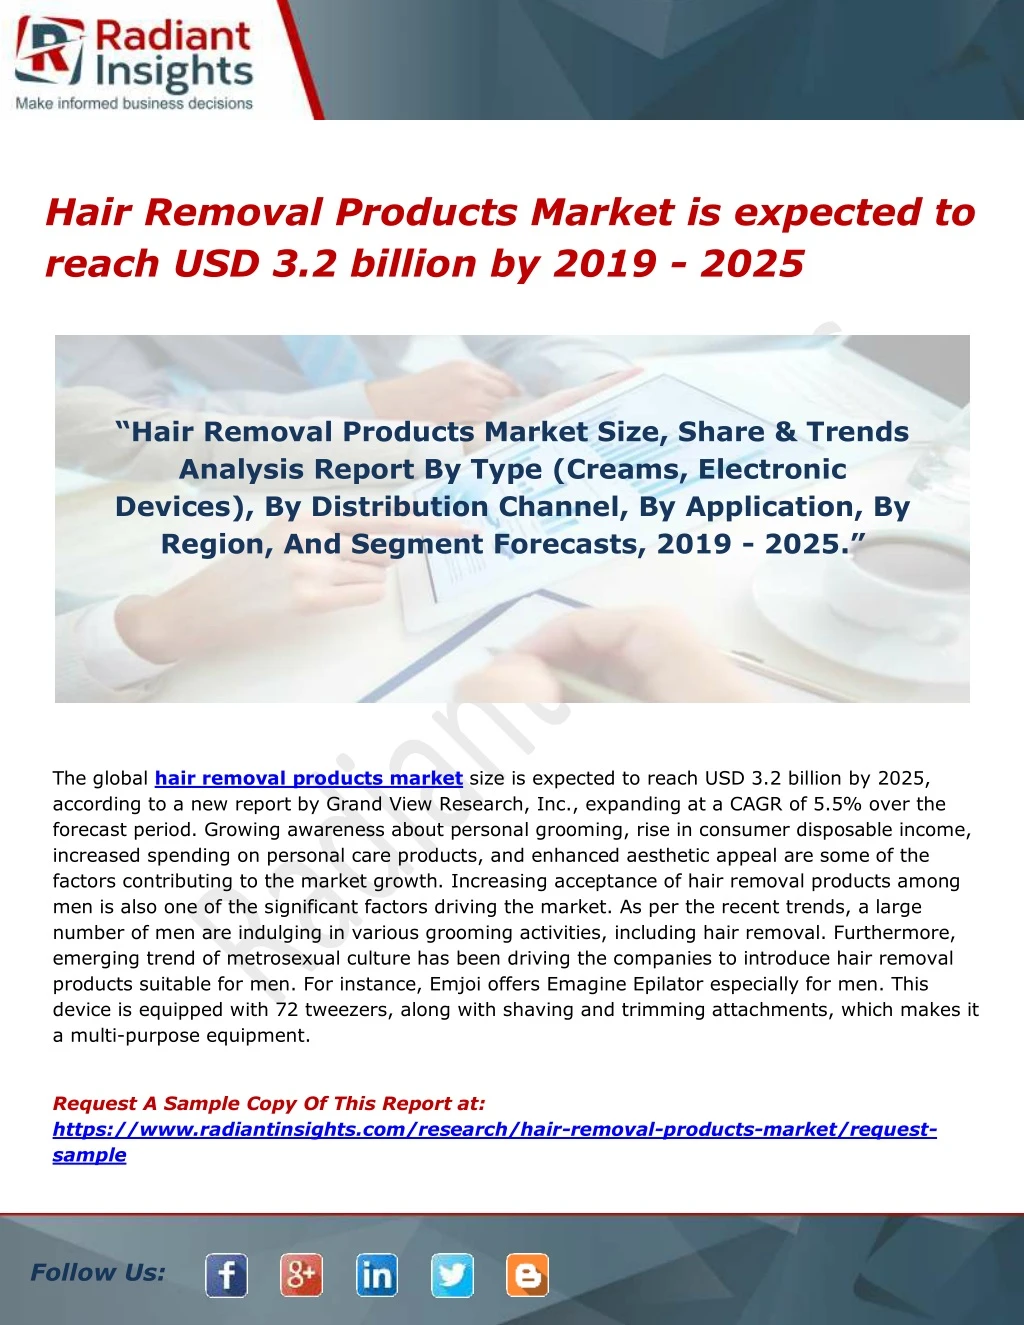 hair removal products market is expected to reach